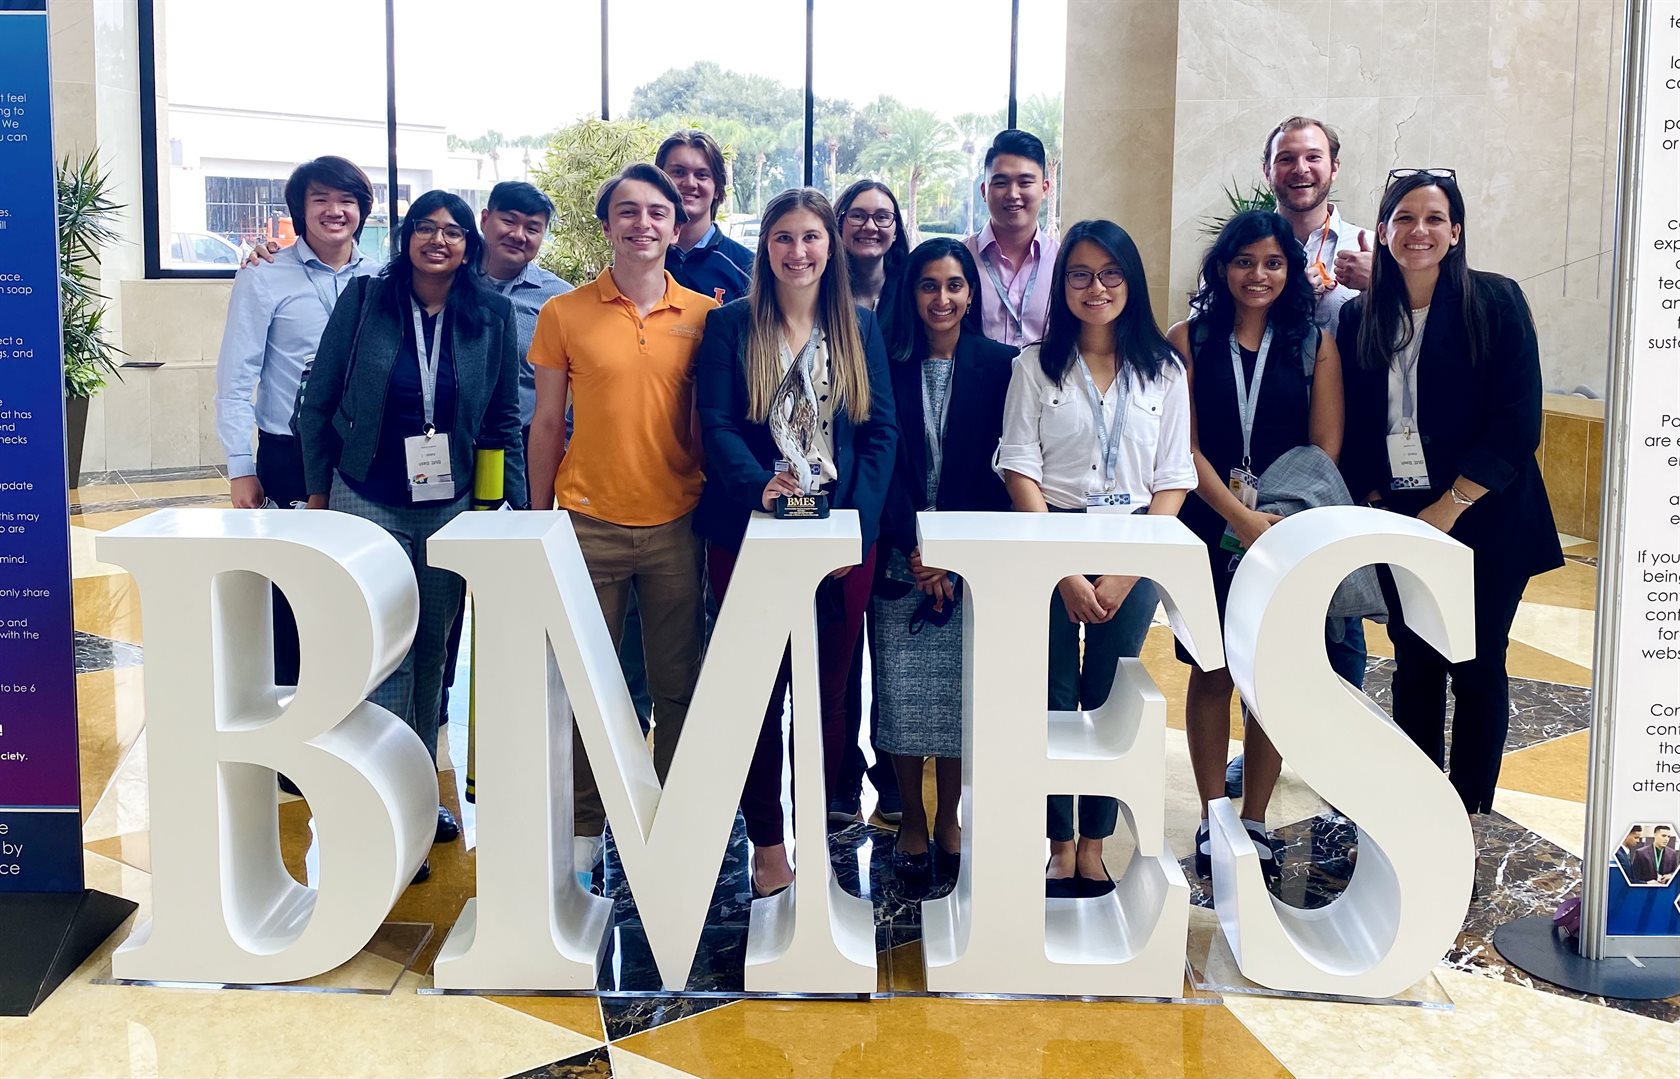 Illinois bioengineering attendees at the 2021 BMES Annual Meeting in Orlando, Florida.&nbsp;